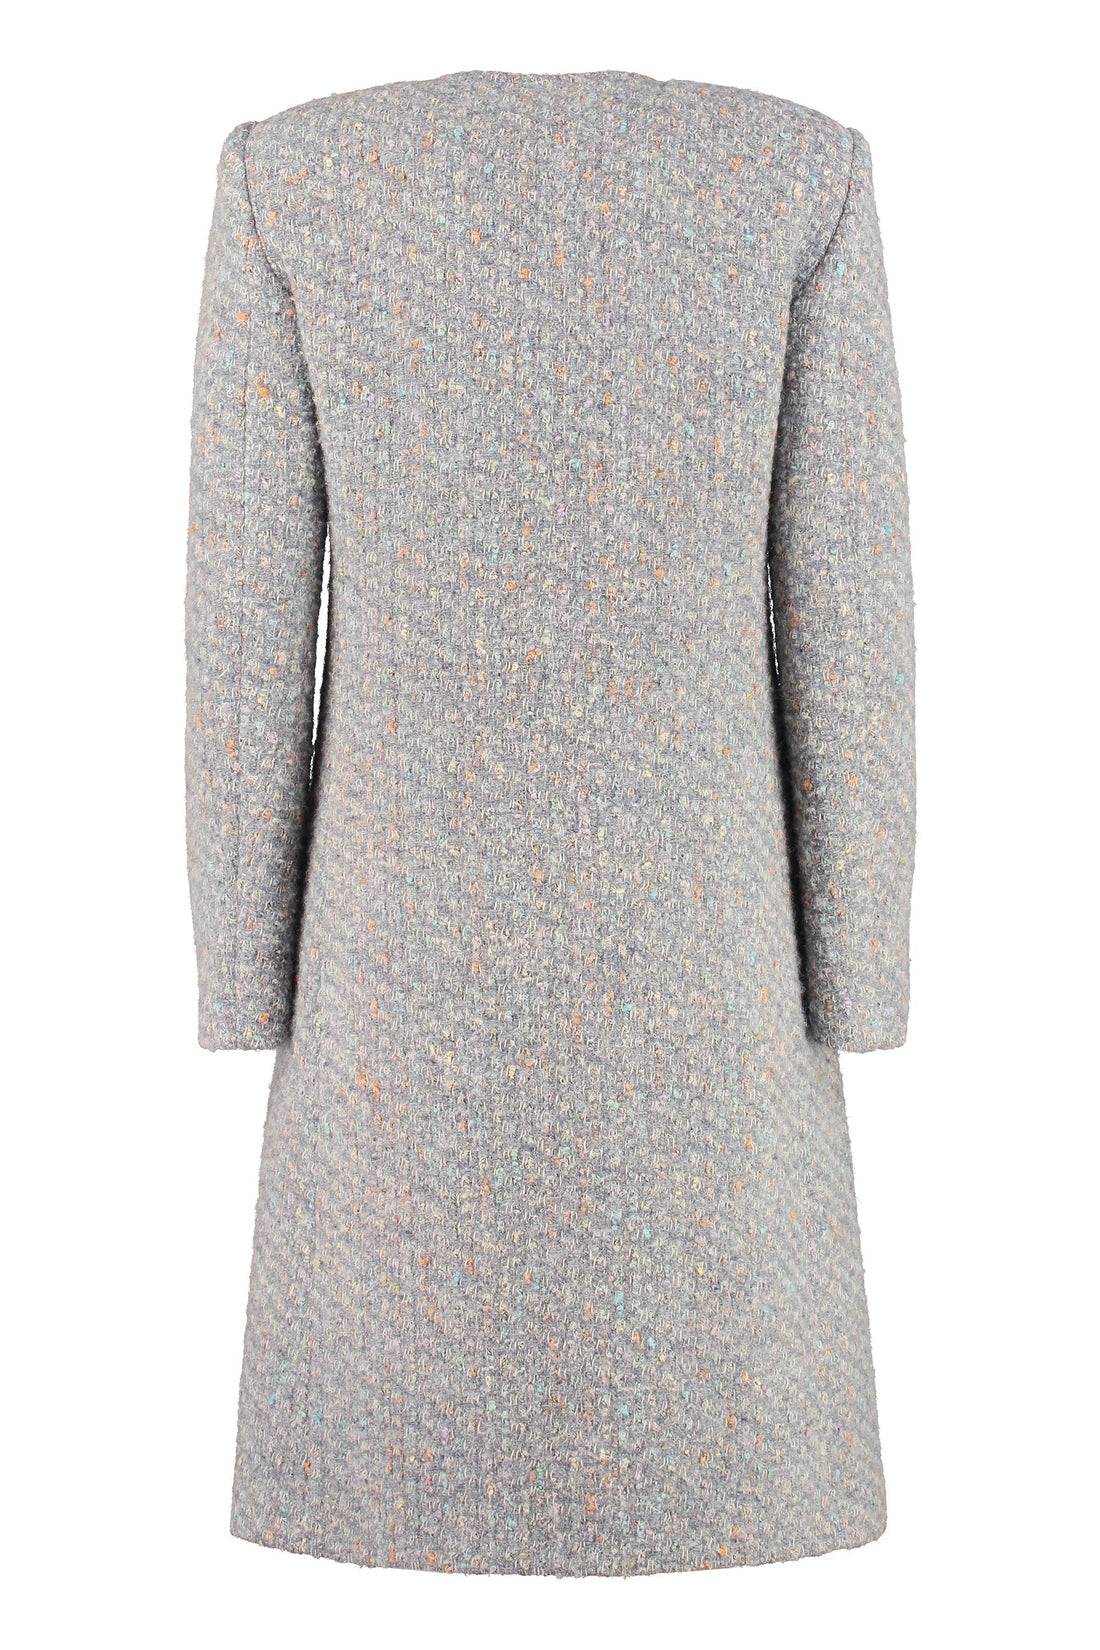 Moschino-OUTLET-SALE-Boucle knit coat-ARCHIVIST